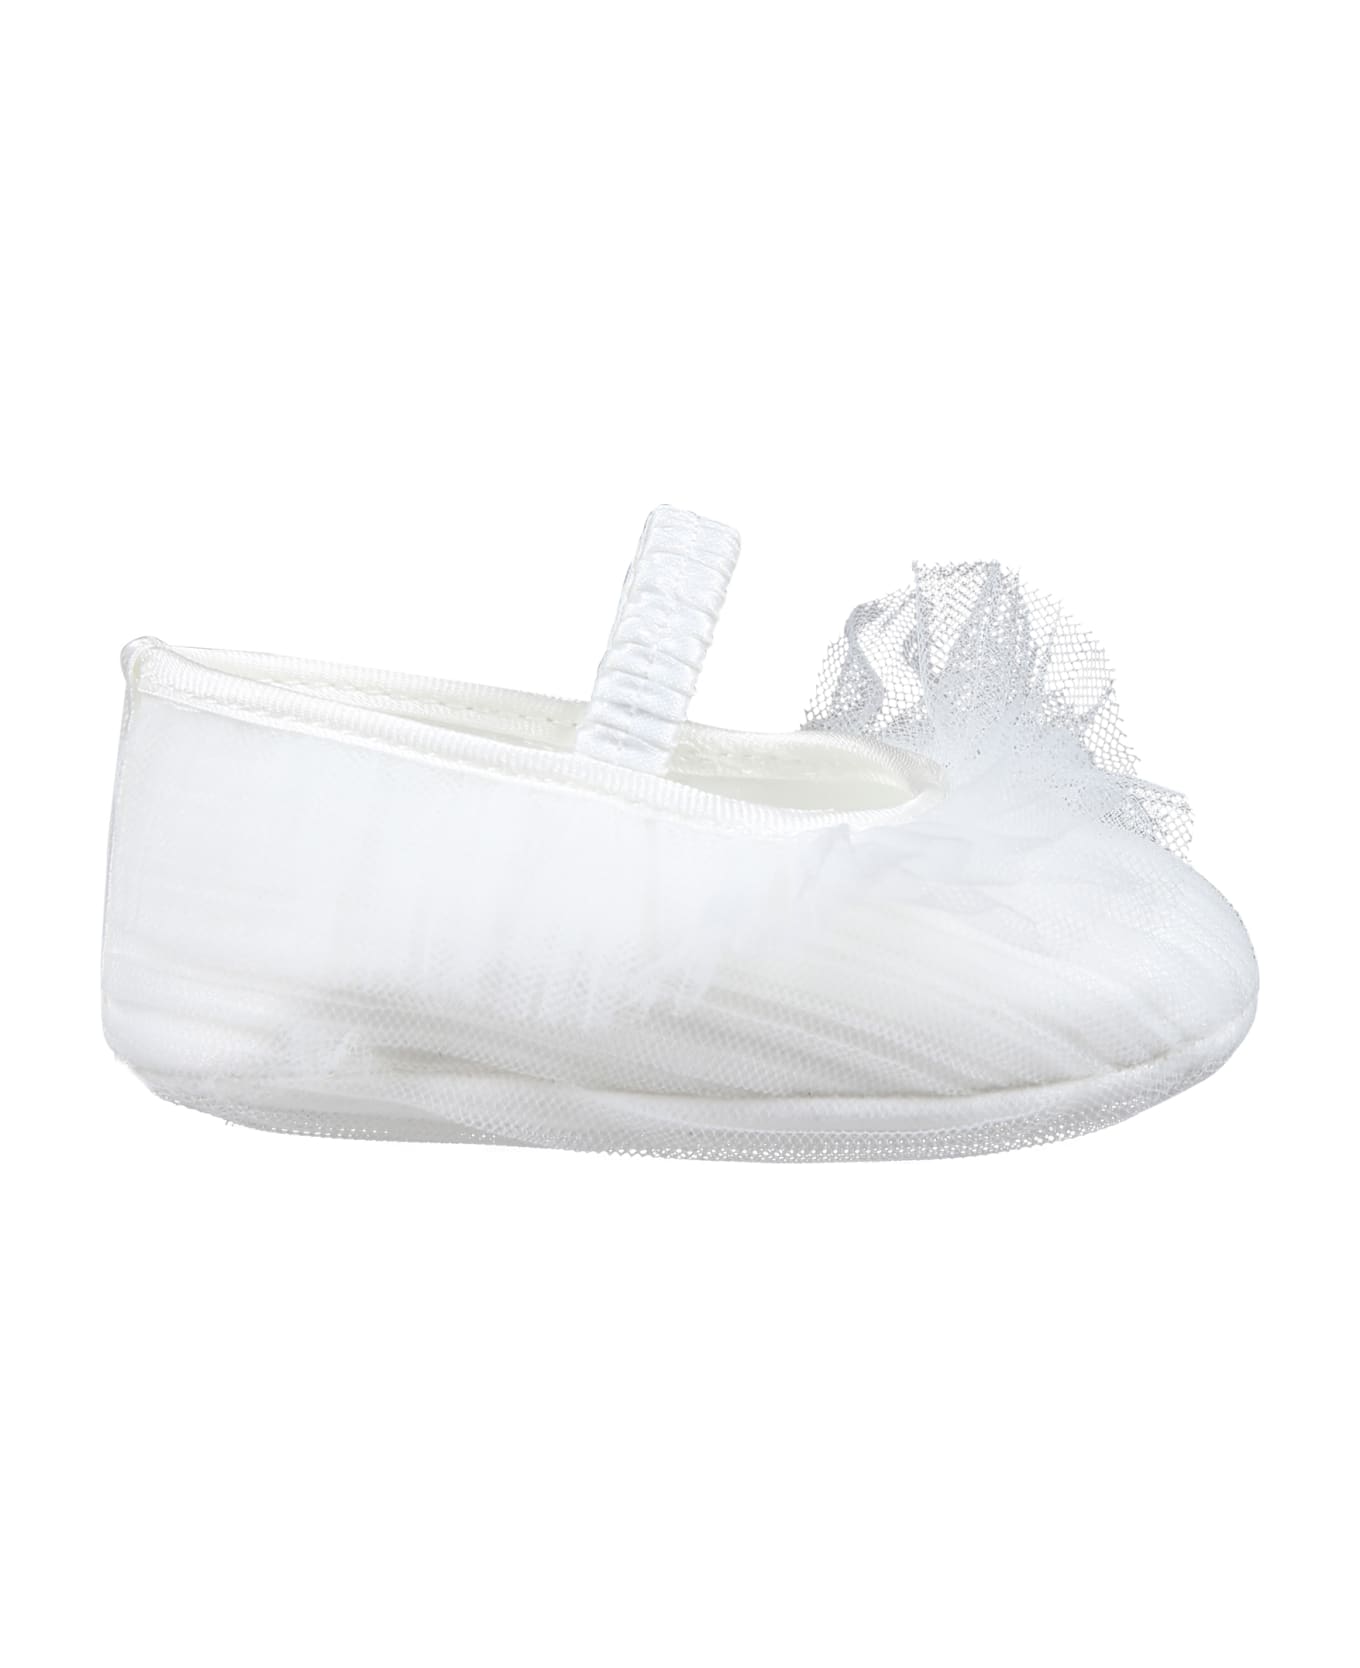 Monnalisa White Flat Shoes For Baby Girl With Tulle Bow - White シューズ